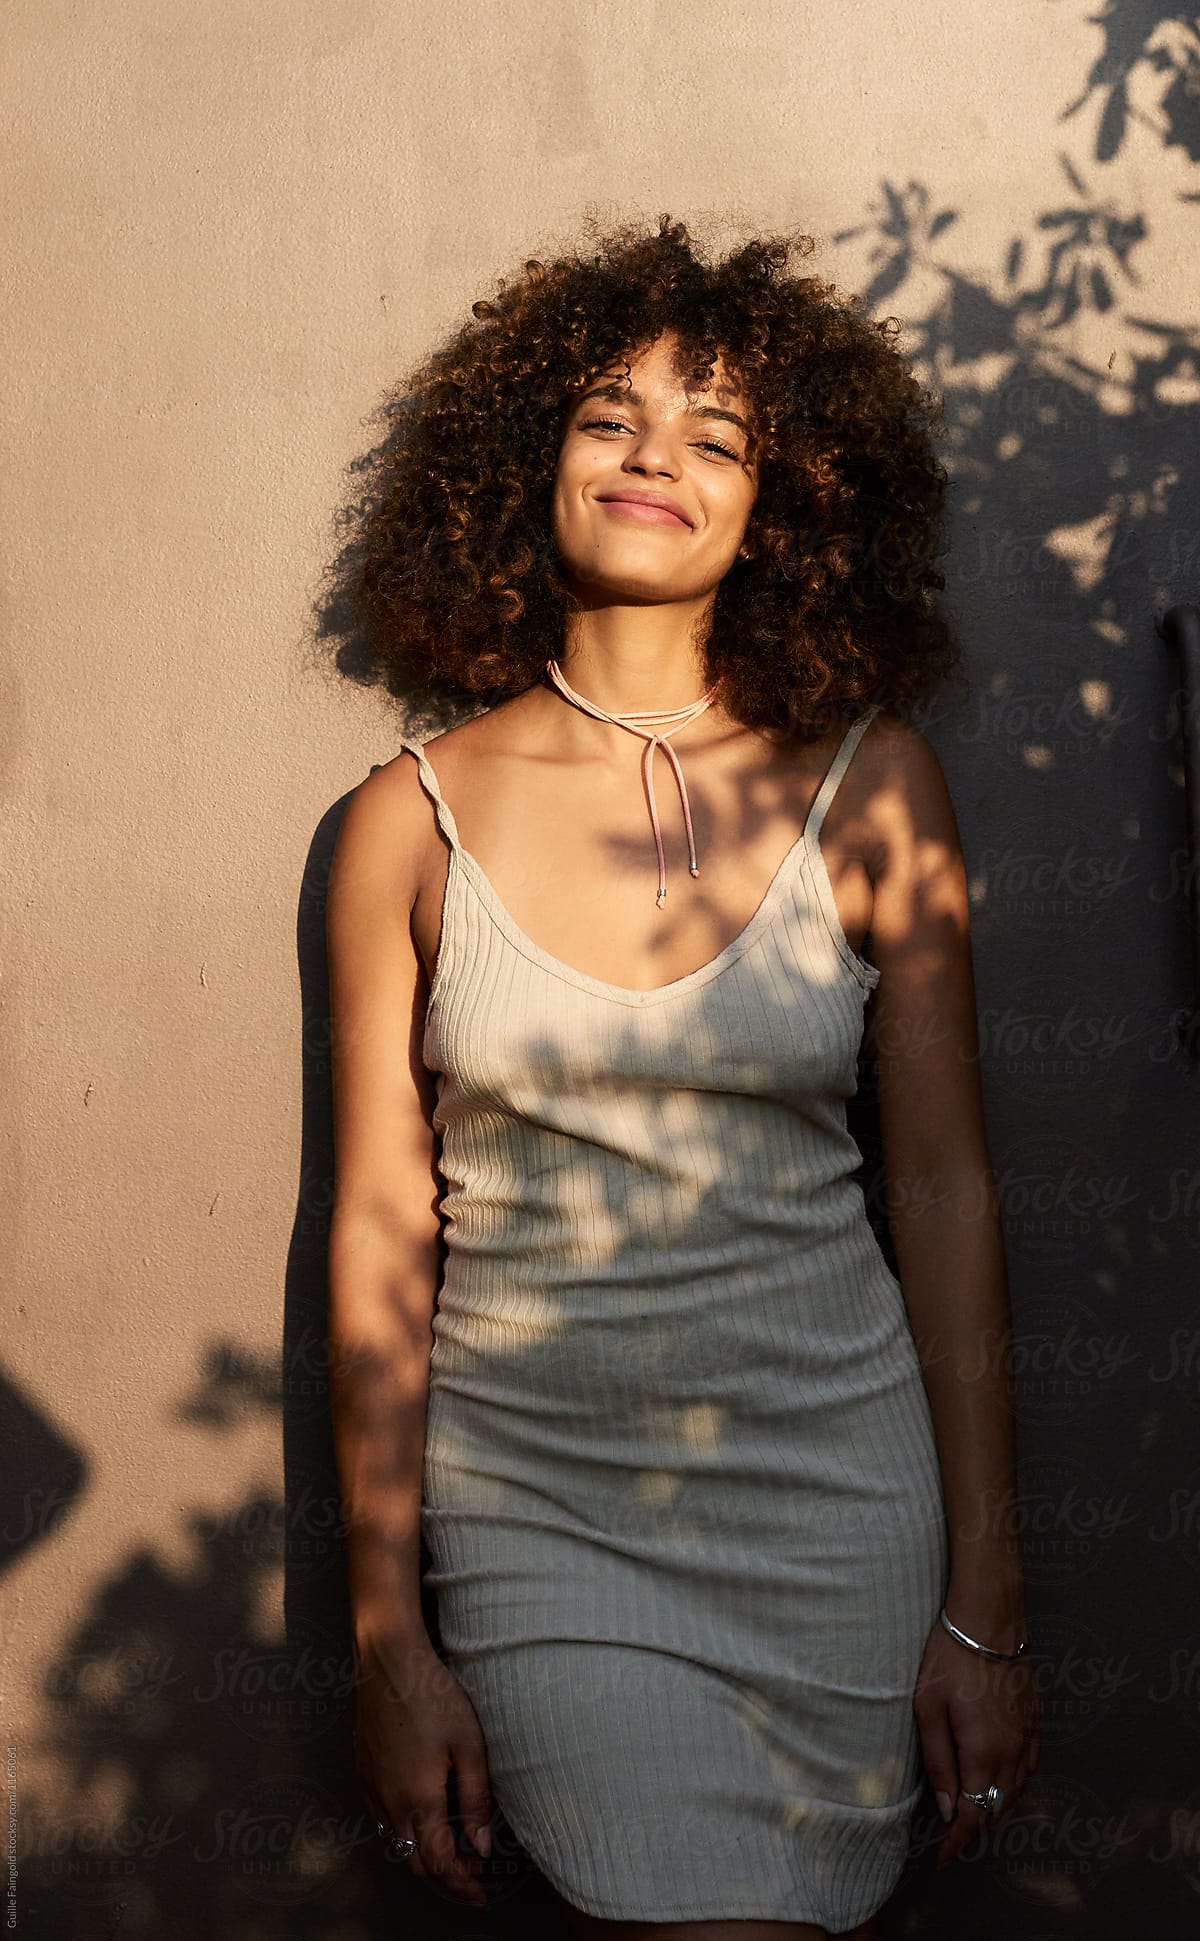 Confident Curly Hair Woman Smiling By Stocksy Contributor Guille Faingold Stocksy 